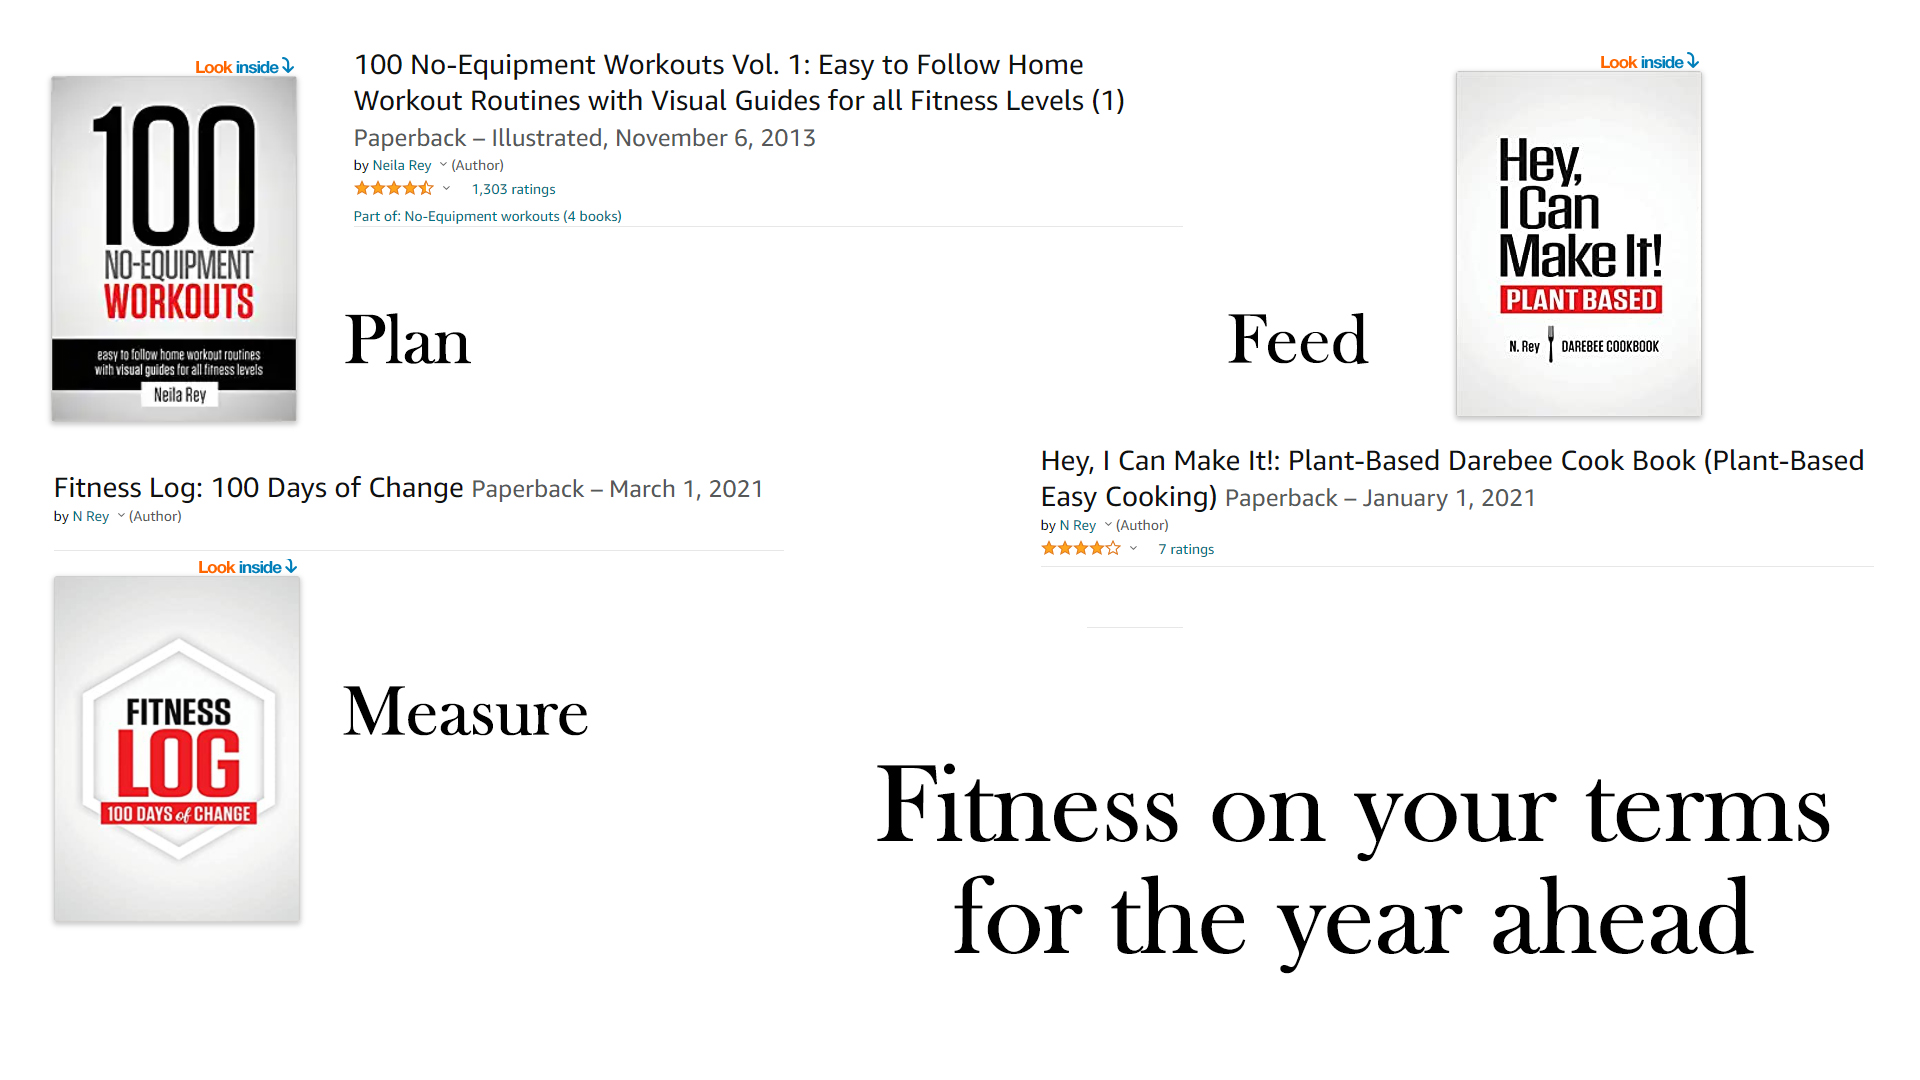 Look inside 3 100 No-Equipment Workouts Vol. 1: Easy to Follow Home

Workout Routines with Visual Guides for all Fitness Levels (1)
Paper! rba a ei d, November 6, 2013 H
ca

Look inside 3

Mt HPT Make It!
VTE)
li Plan Feed Tp

Hey, | Can Make It!: Plant-Based Darebee Cook Book (Plant-Based

Fitness Log: 100 Days of Change Paperback - March 1, 2021 Easy Cooking) Paperback - January 1, 2021

Look inside 3

FITNESS Measure

Fitness on your terms

for the year ahead